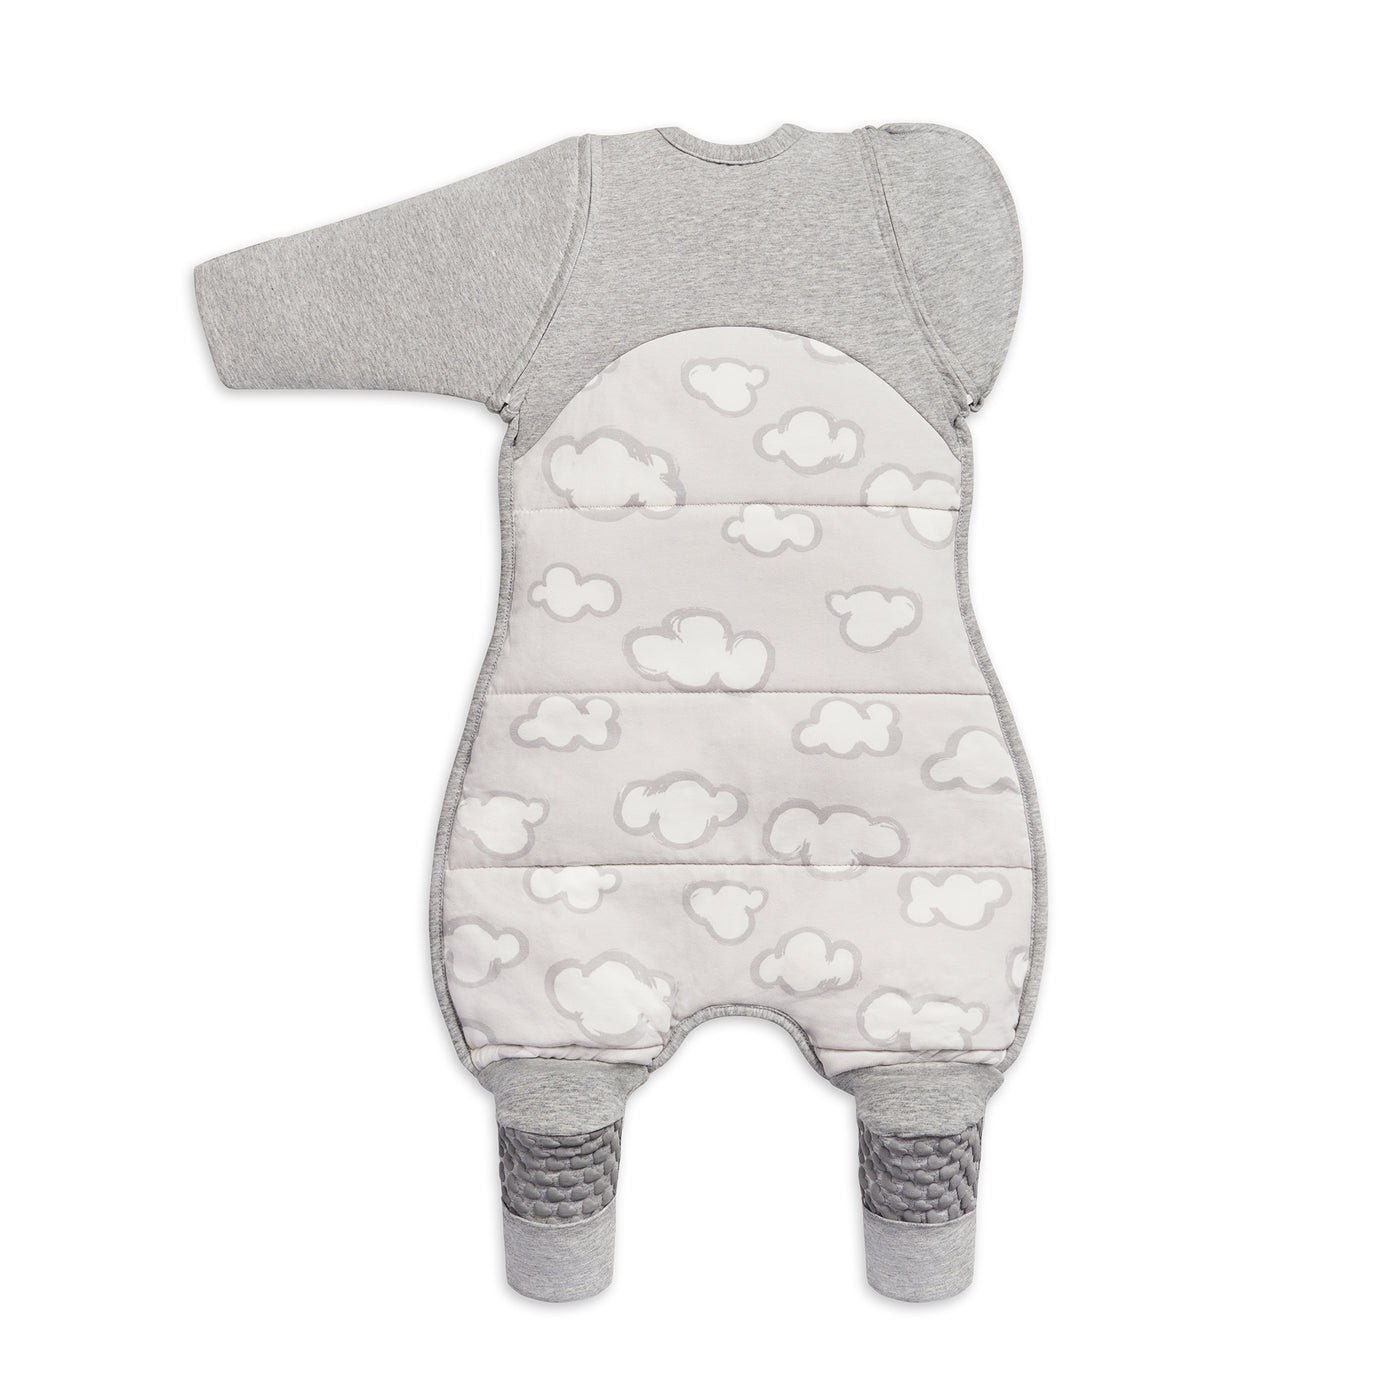 Preserve your precious sleep routine when it’s time to transition. The five-piece Swaddle Up™ Transition Suit Warm 2.5 TOG helps your baby to gradually adjust to sleeping un-swaddled, then also serves as a cosy sleep & play suit. Perfect for those cold winter months.